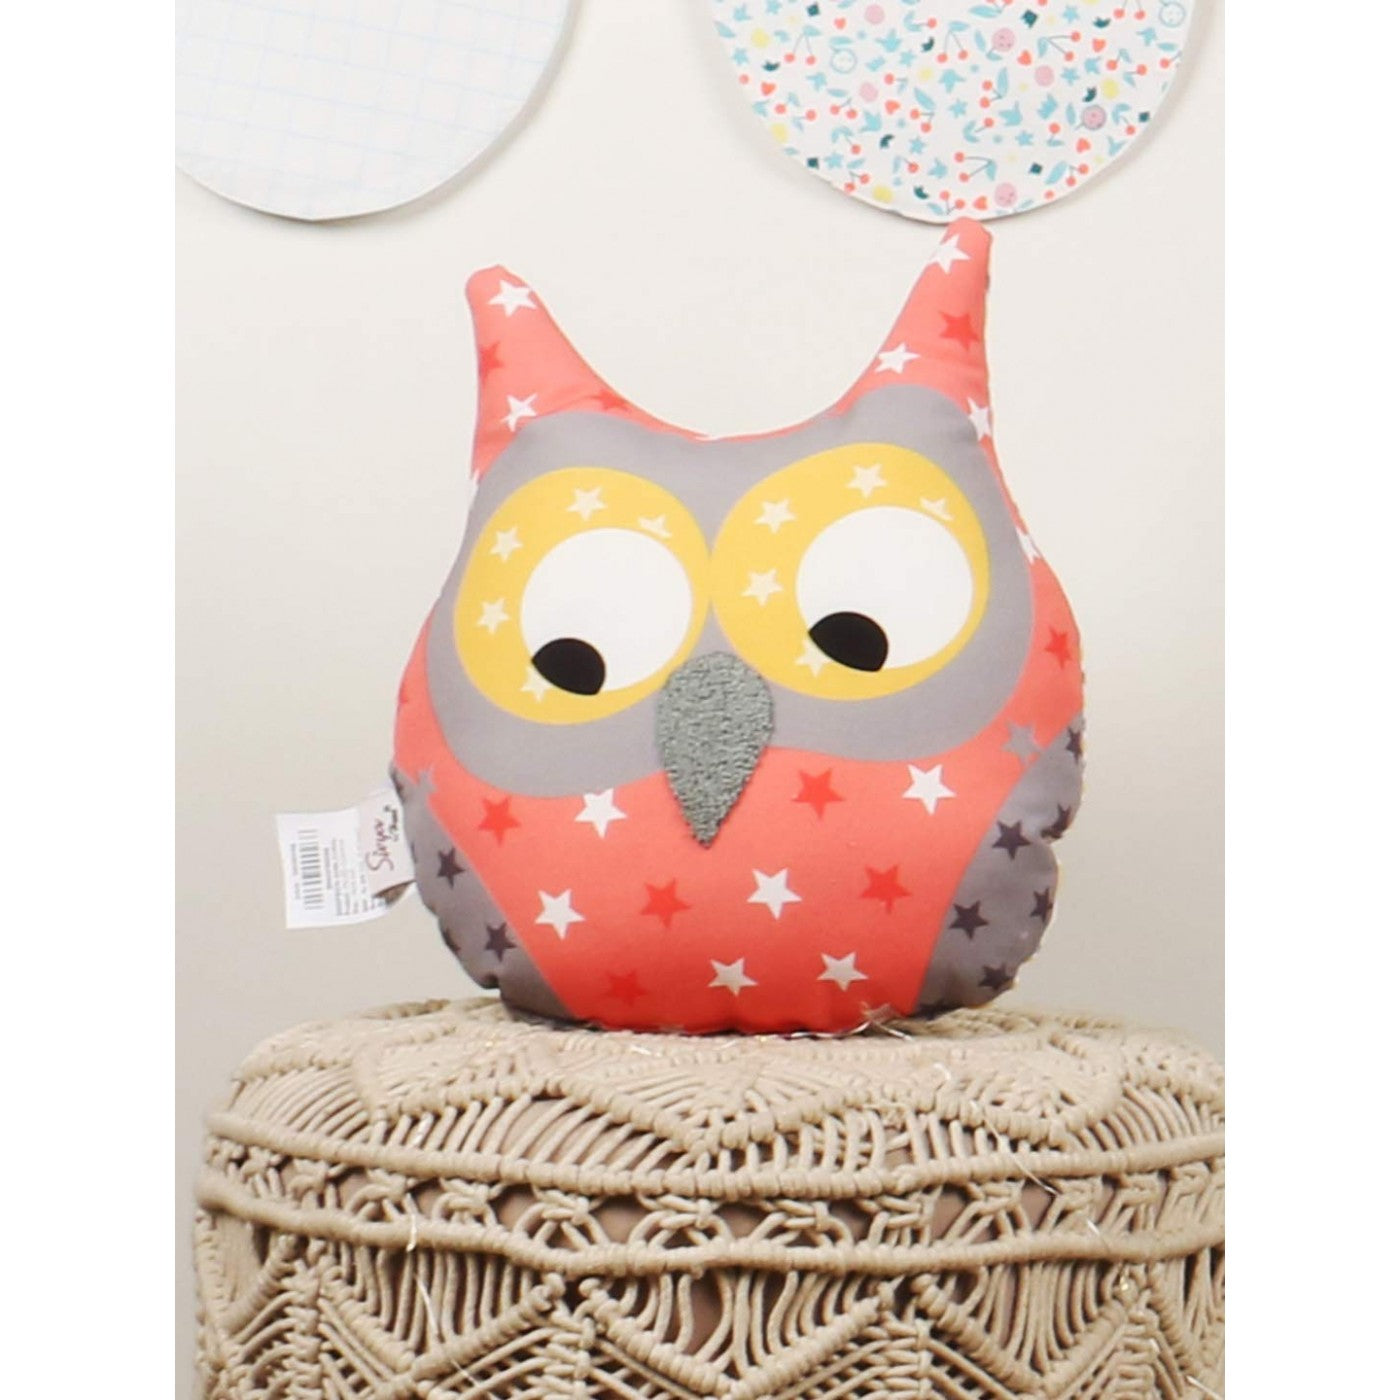 Whimsical Wisdom: Owl-Shape Comfort in Polyduck Cushion